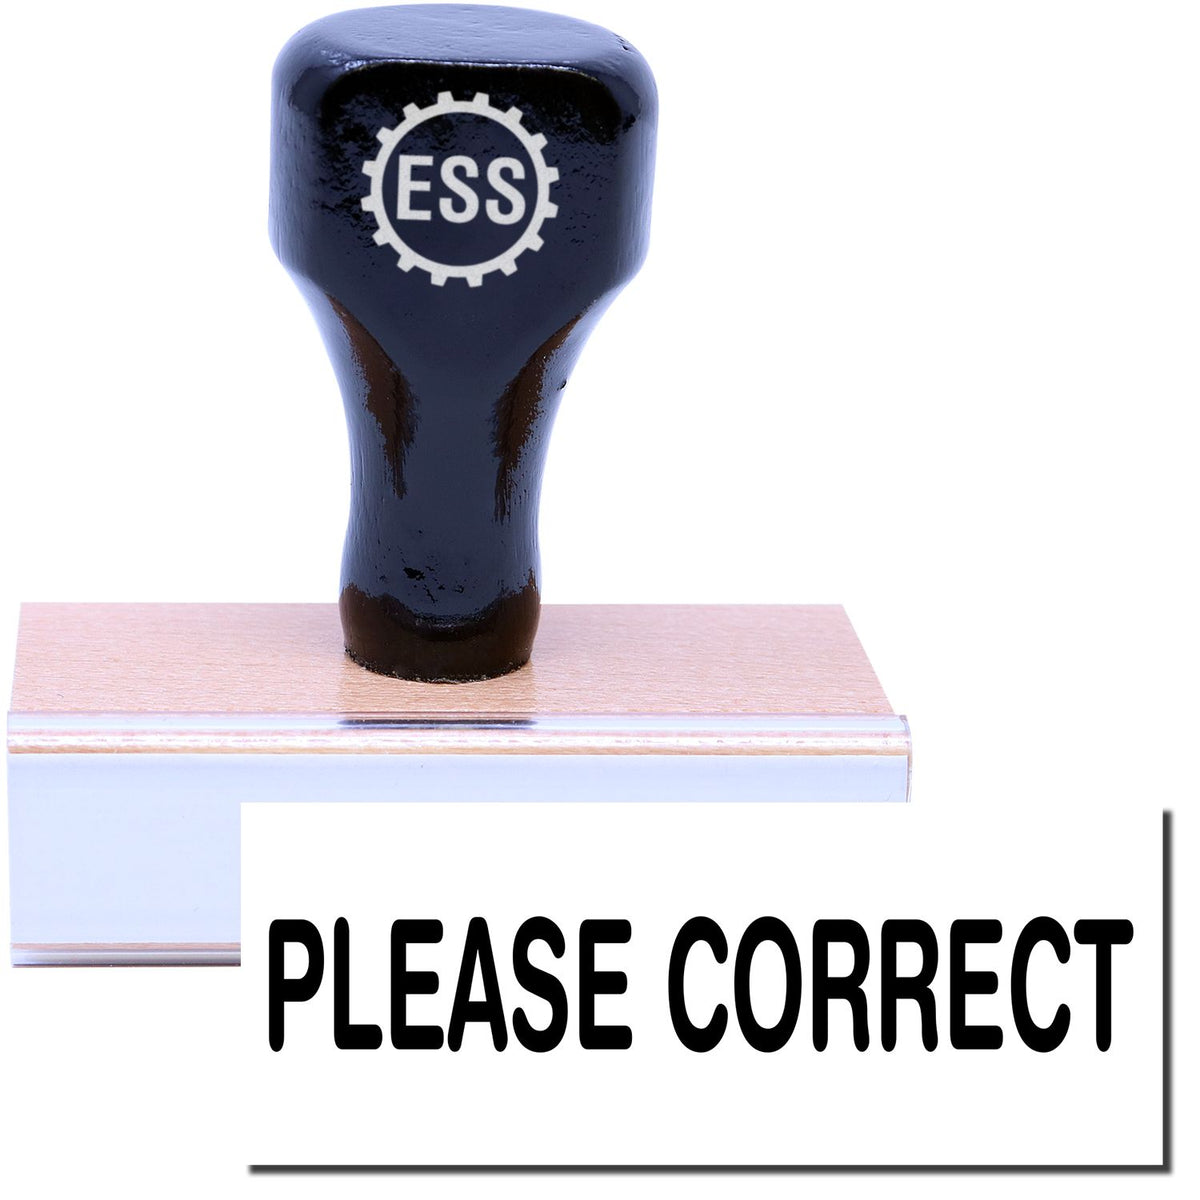 A stock office rubber stamp with a stamped image showing how the text &quot;PLEASE CORRECT&quot; in a large font is displayed after stamping.